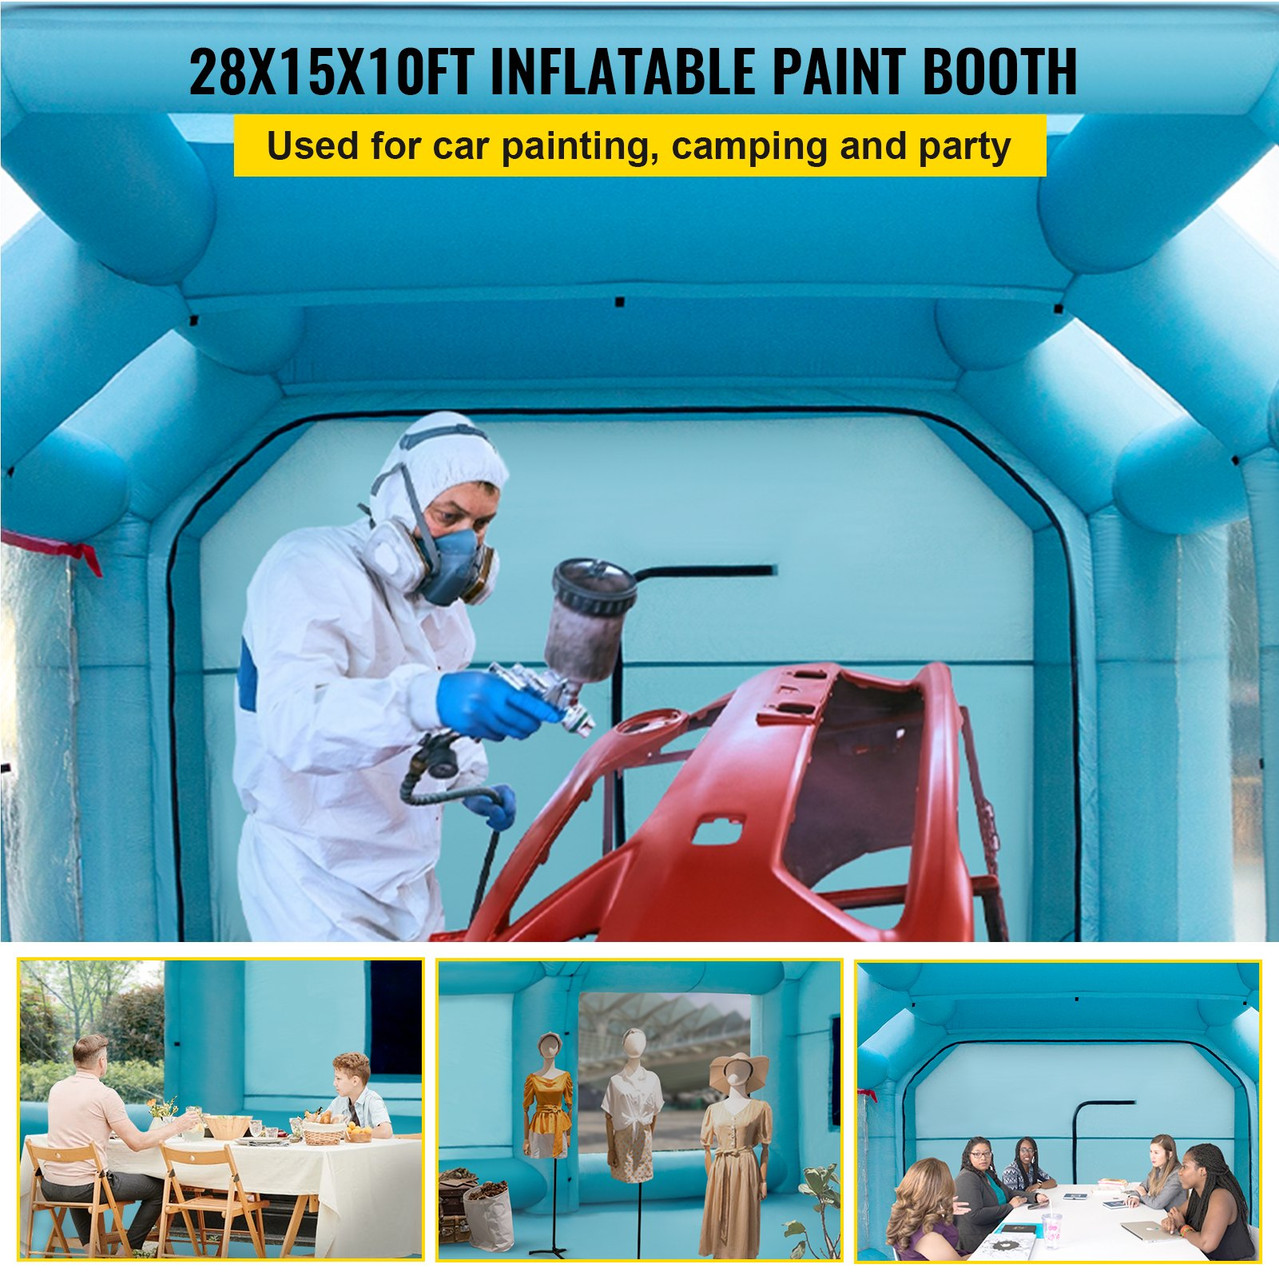 Portable Inflatable Paint Booth, 28x15x10ft Inflatable Spray Booth, Car Paint Tent w/Air Filter System & 2 Blowers, Upgraded Blow Up Spray Booth Tent, Auto Paint Workstation, Car Parking Garage